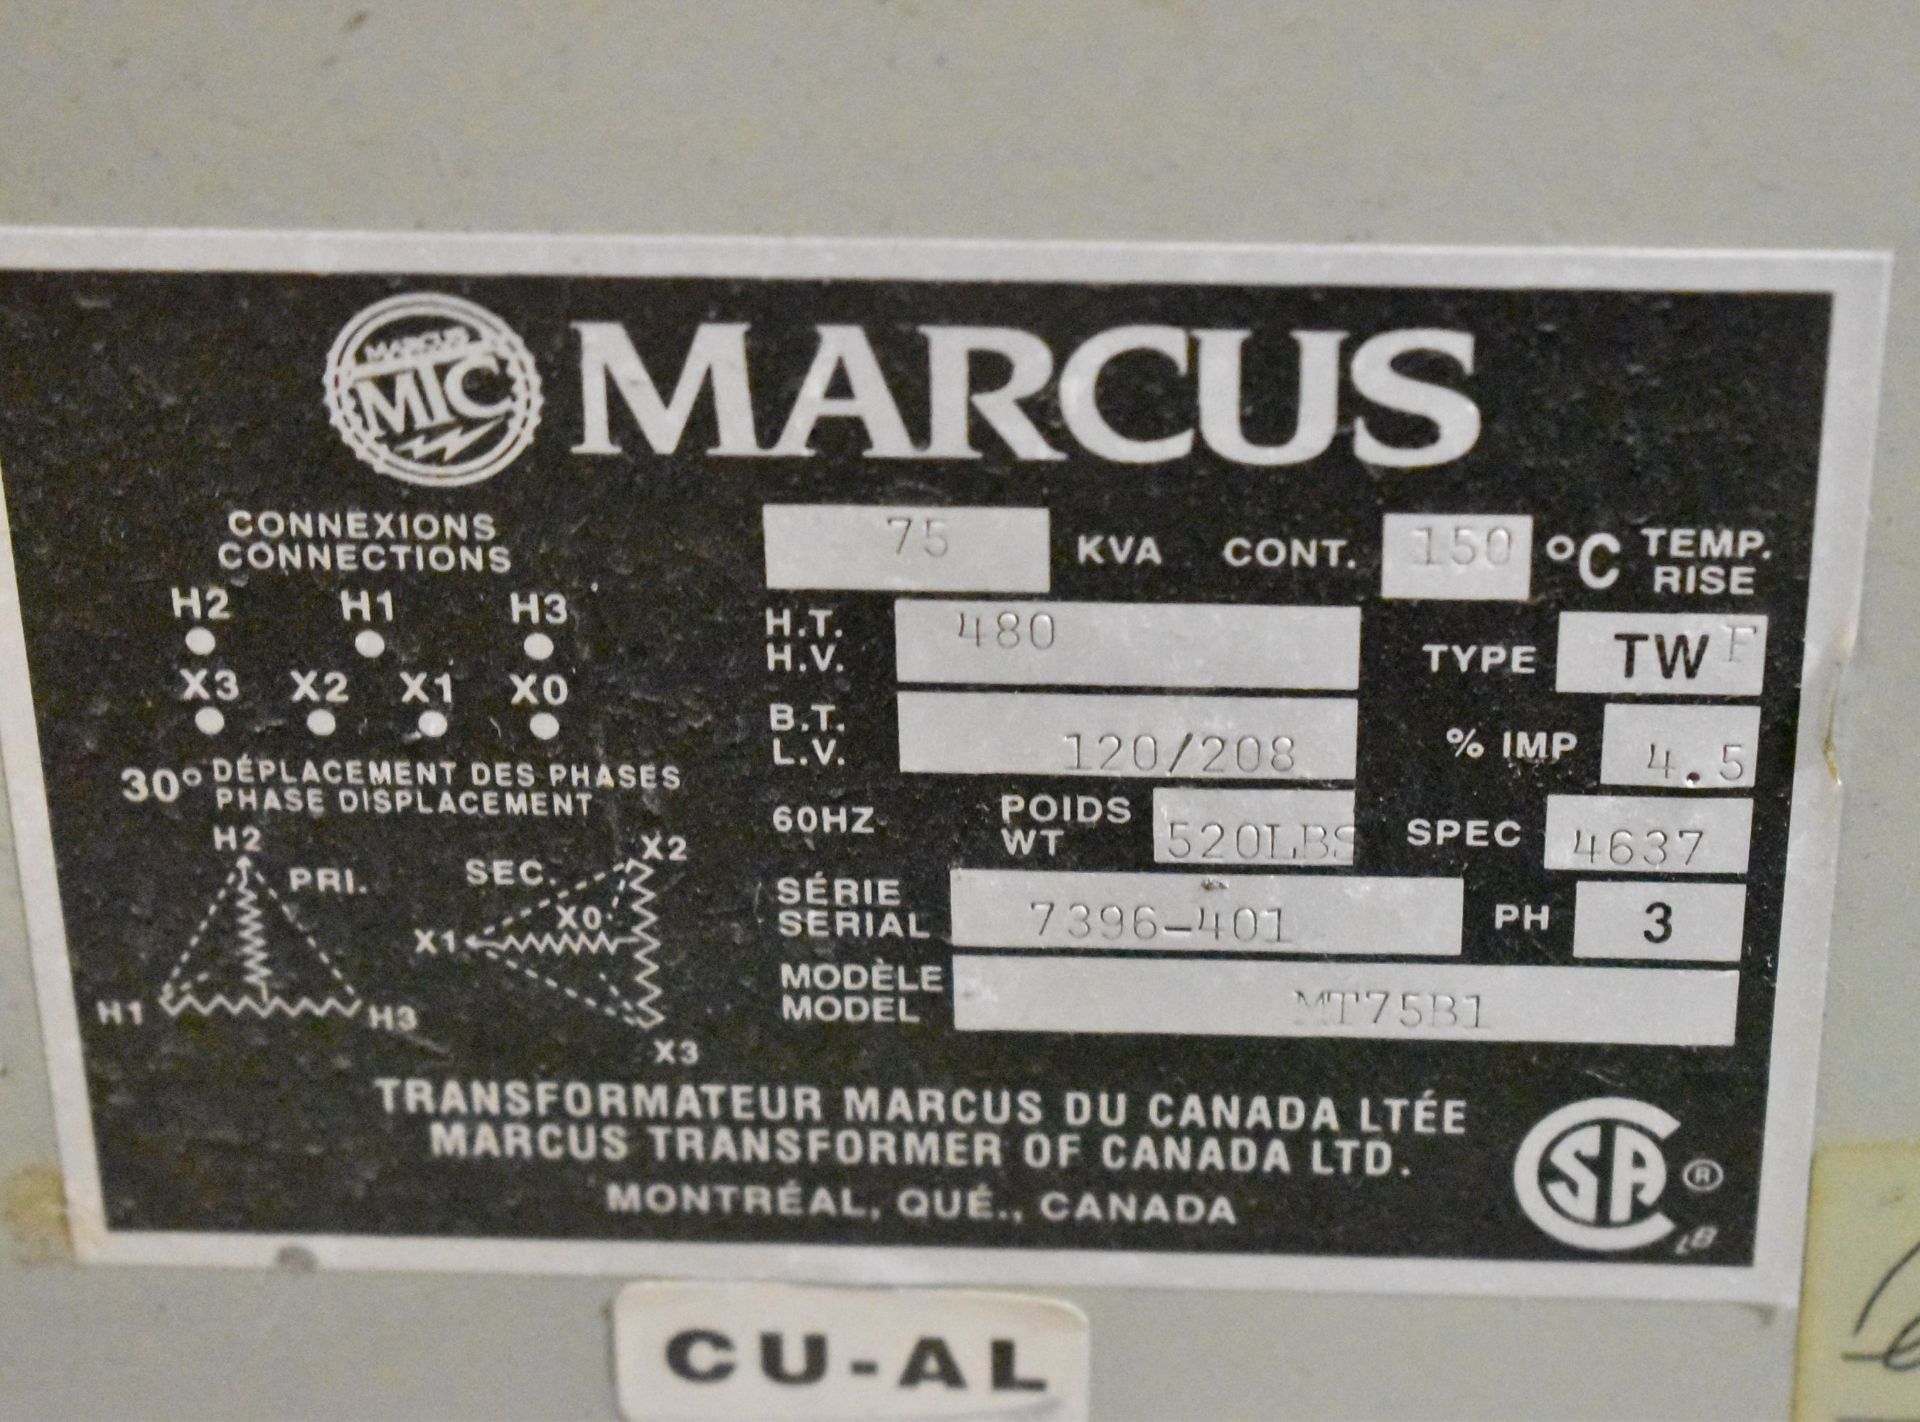 LOT/ (2) MARCUS 75 KVA TRANSFORMERS WITH 480HV/120/208LV/3PH - Image 2 of 2